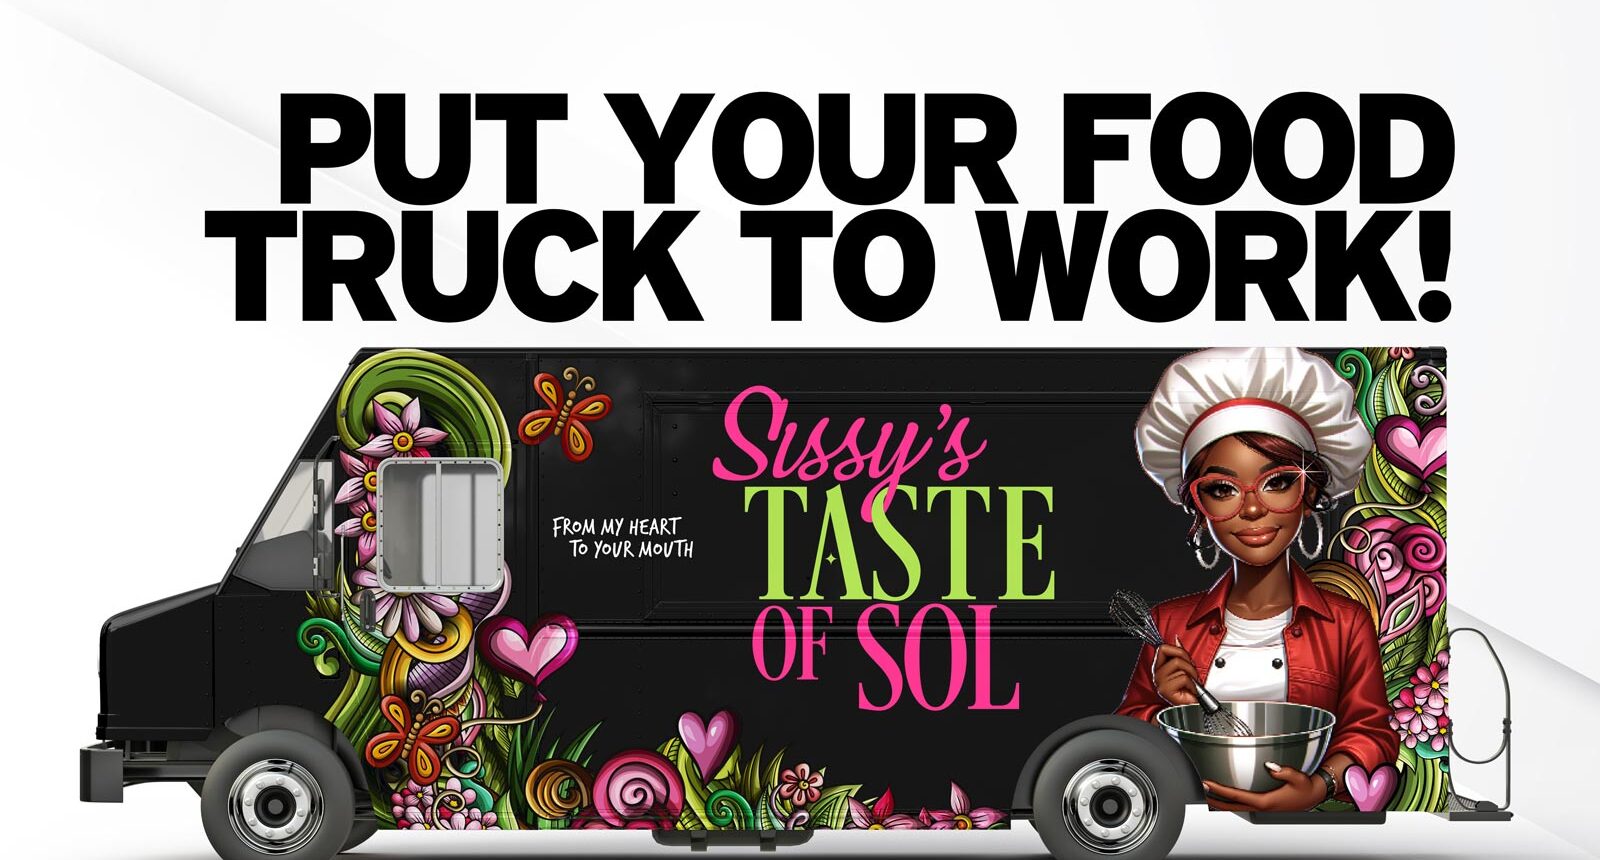 Put Your Food Truck to Work Wrap inDenton by WrapMasters for Sissys taste of sol.jpg